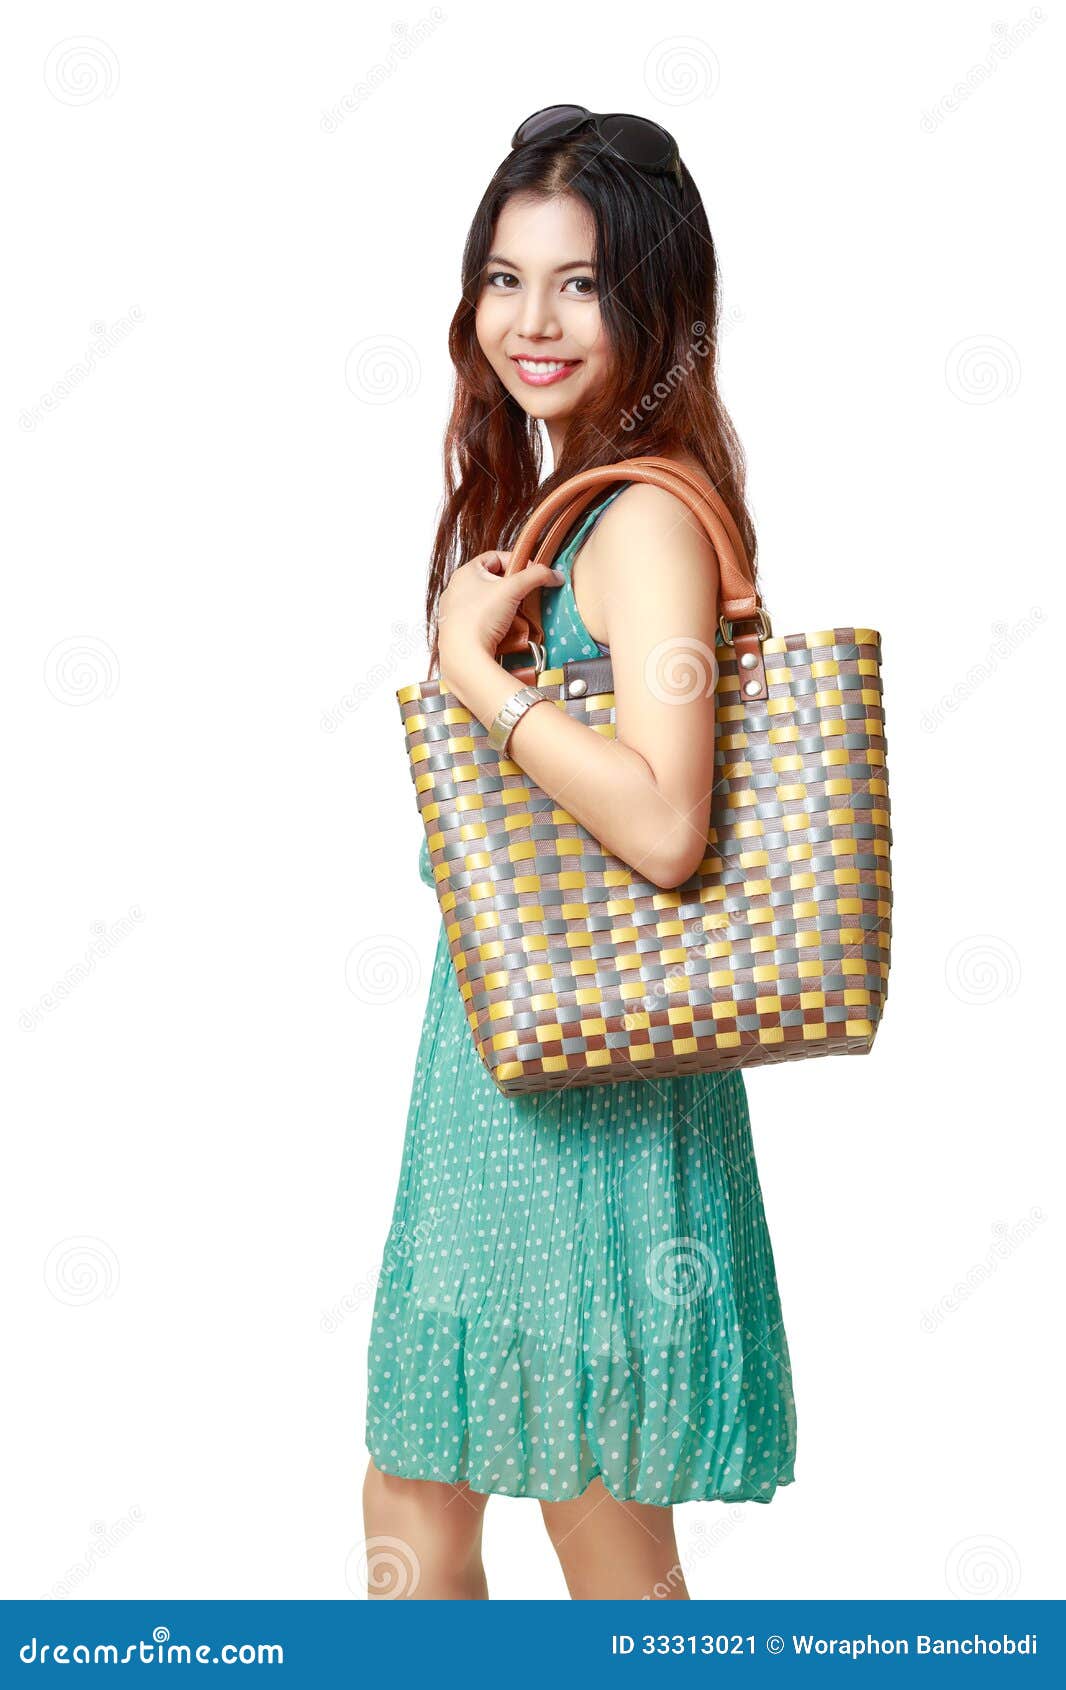 https://thumbs.dreamstime.com/z/young-asian-woman-holding-handbag-isolated-over-white-33313021.jpg